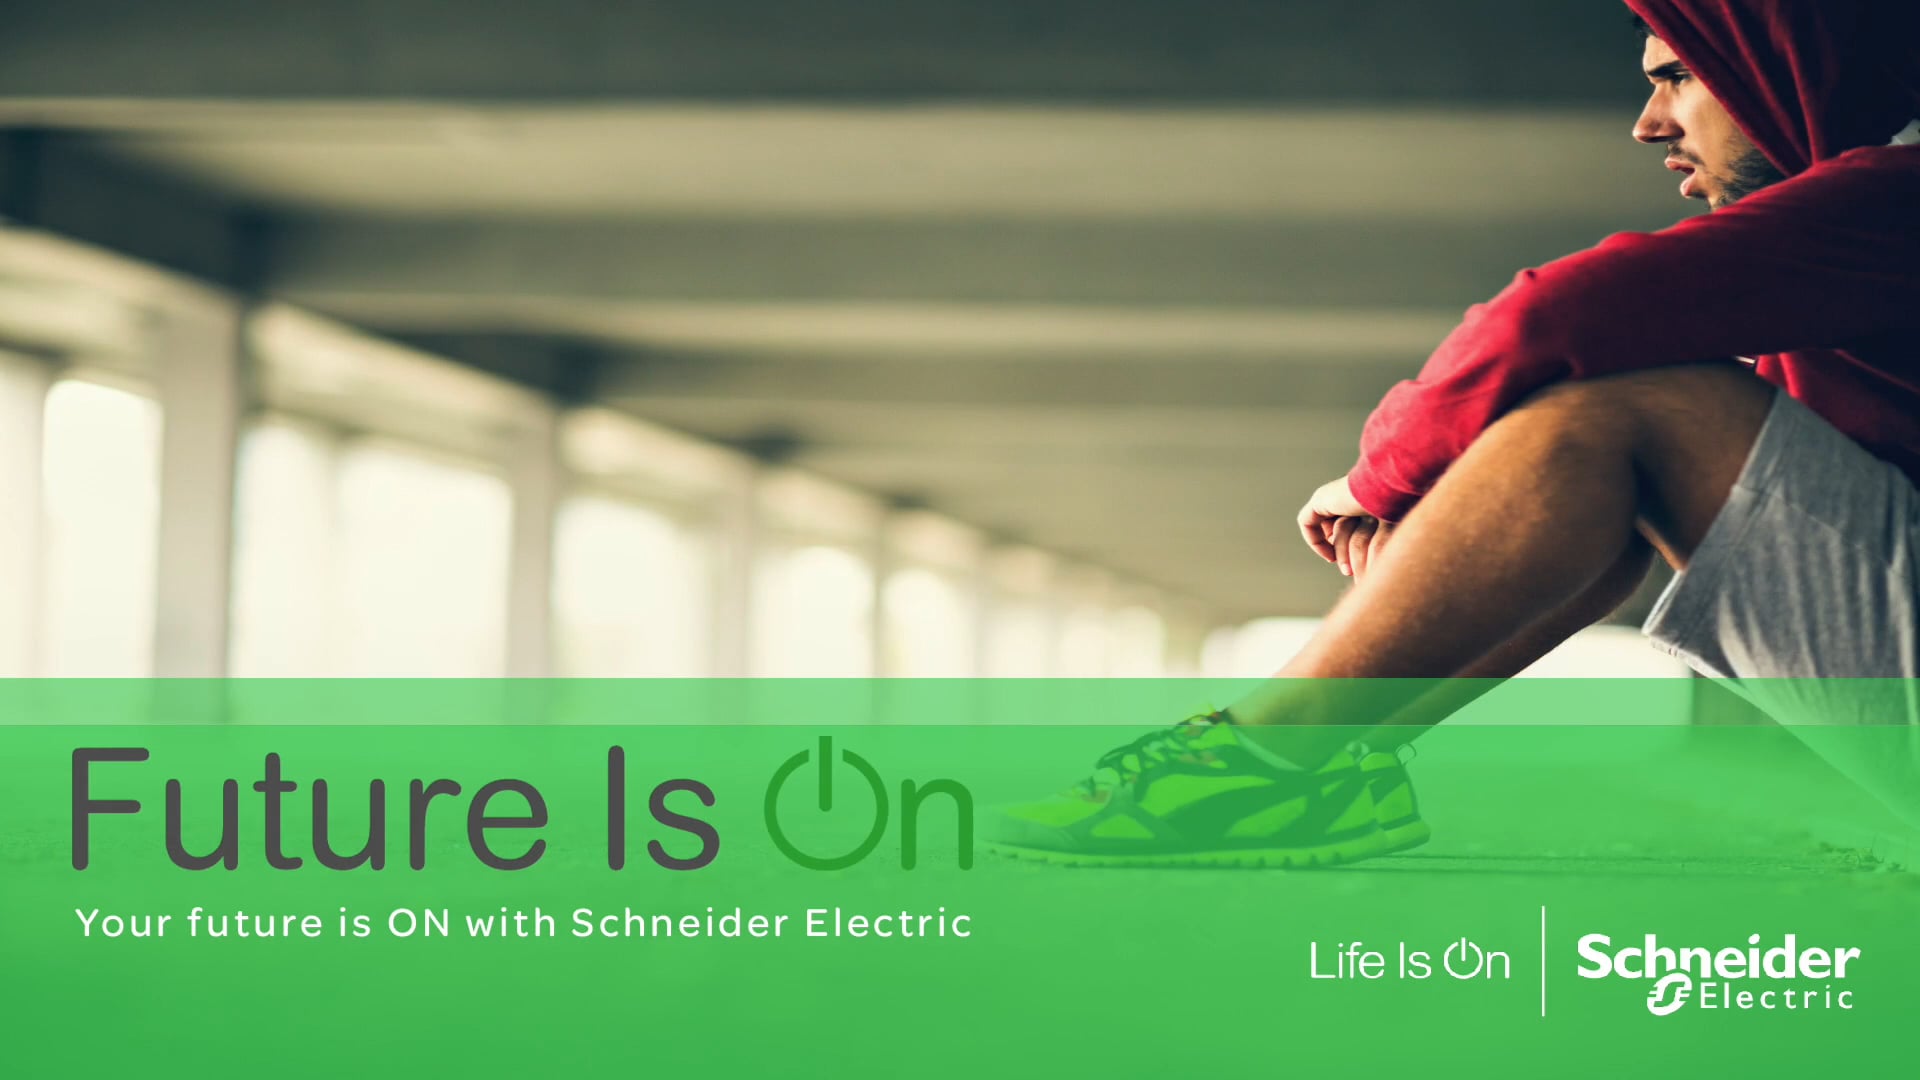 Future is ON with Schneider Electric